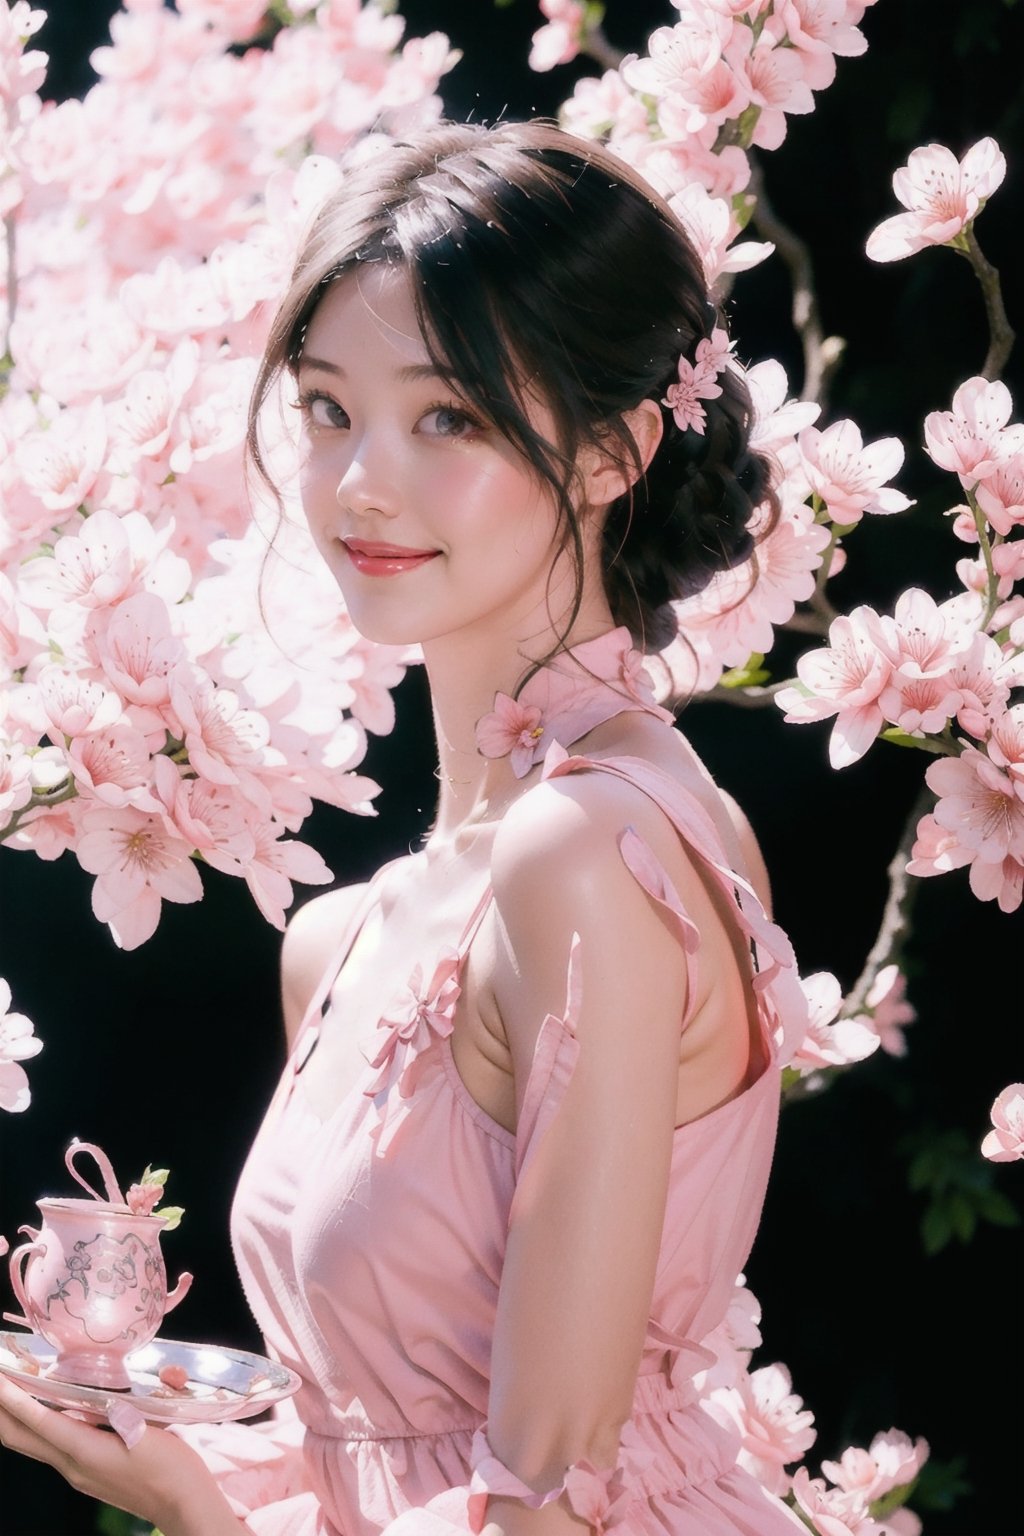 (Fujifilm), Real photo, a Japanese woman, 19 years old girl, wearing a pink china cheongsam, smiling, the pink cherry blossom petals are flying all over the picture, clear and bright, super High quality, exquisite details, delicate and clear facial features, full body, 1 girl, Double exposure, real person, Dusk, twilight, sunshine light from back, china dress with heart cutout,pink flower